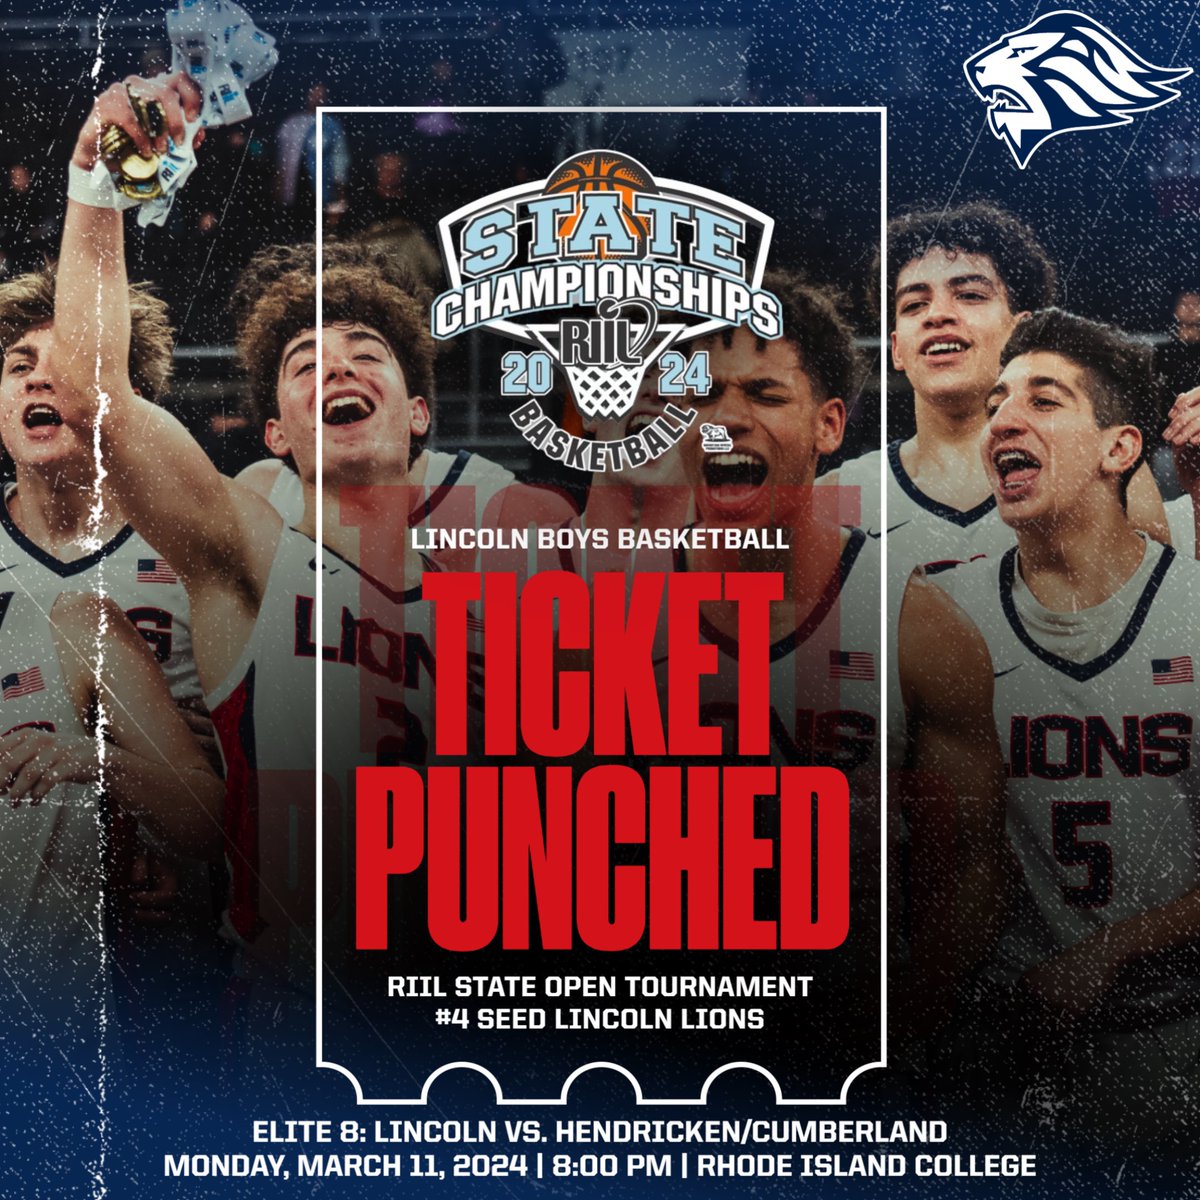 Lions have clinched a spot in the Elite 8 of the RIIL State Open Tournament as the #4 seed, with a first round bye and will face the winner of Hendricken vs. Cumberland.

📆 Monday, March 11th
⌚️8:00 PM
📍Rhode Island College
🎟️ Ticket Link TBA

@LHSRI_Athletics | @LHSRI